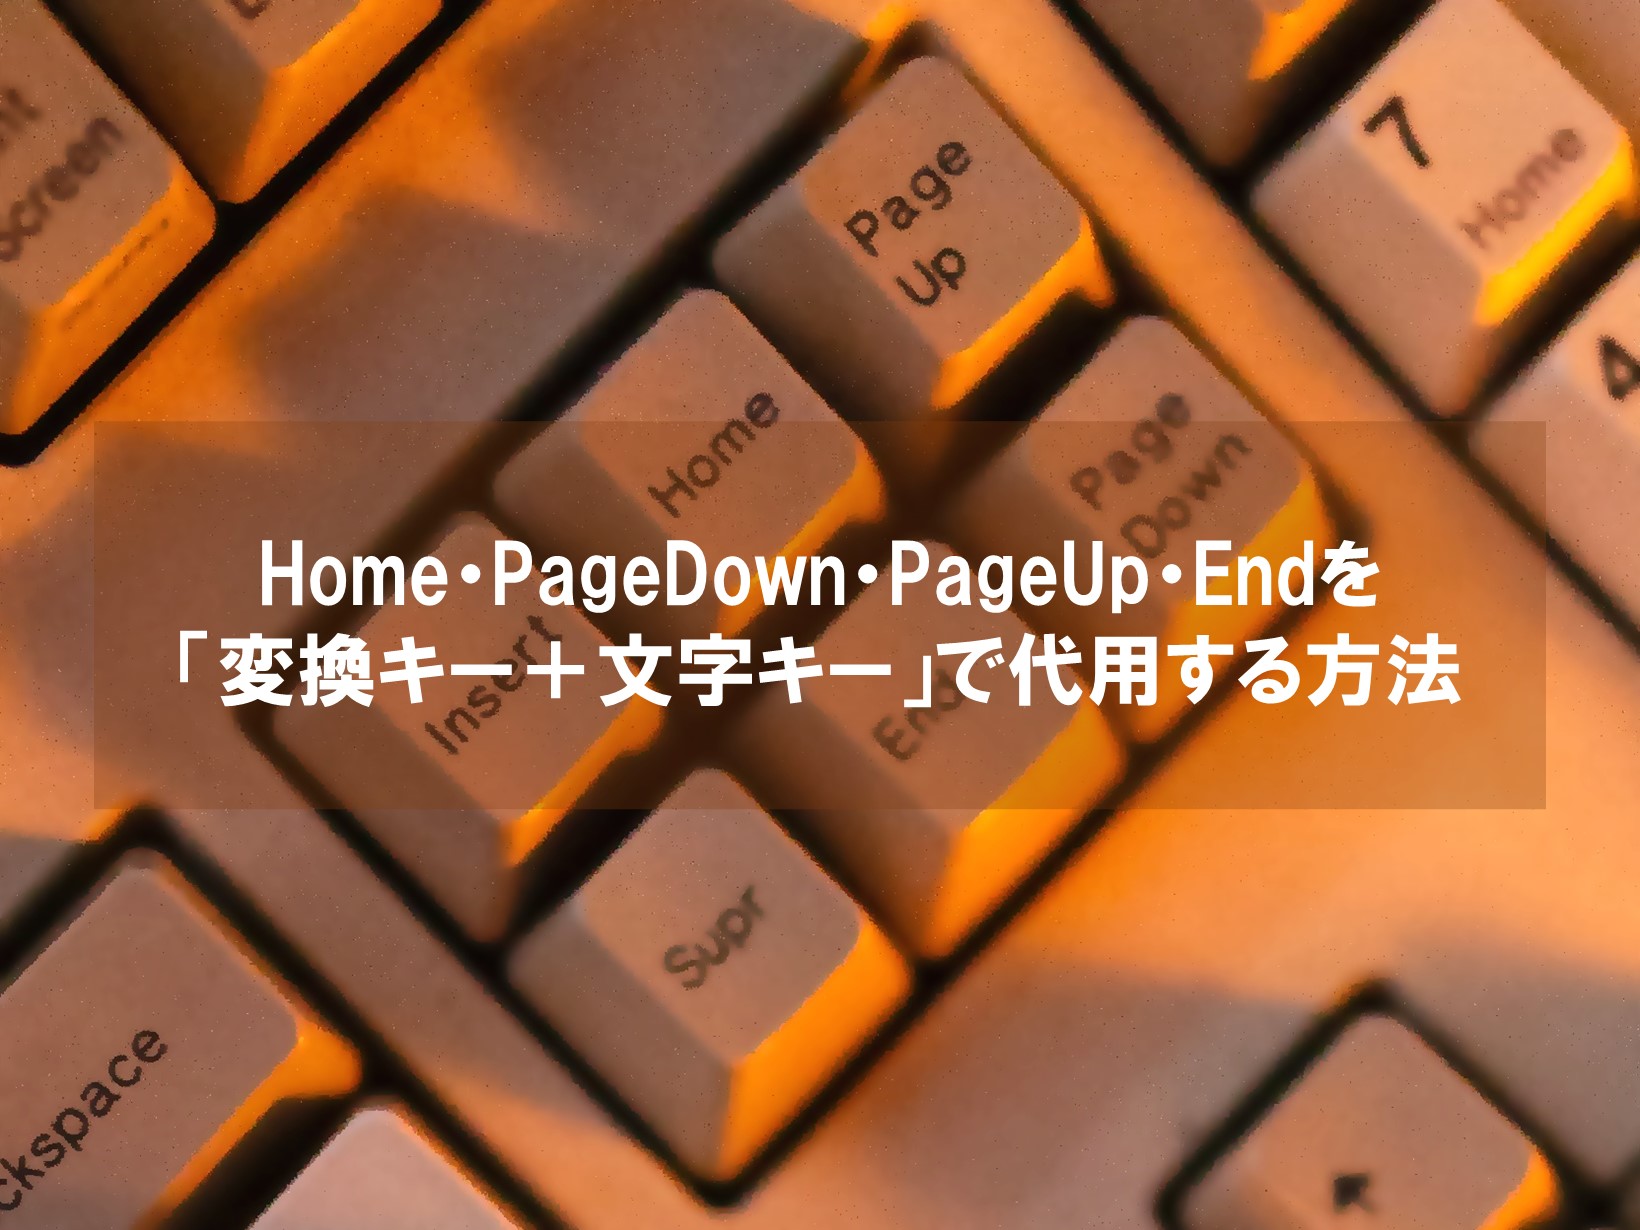 Home・PageDown・PageUp・Endを「変換キー＋文字キー」で代用する方法